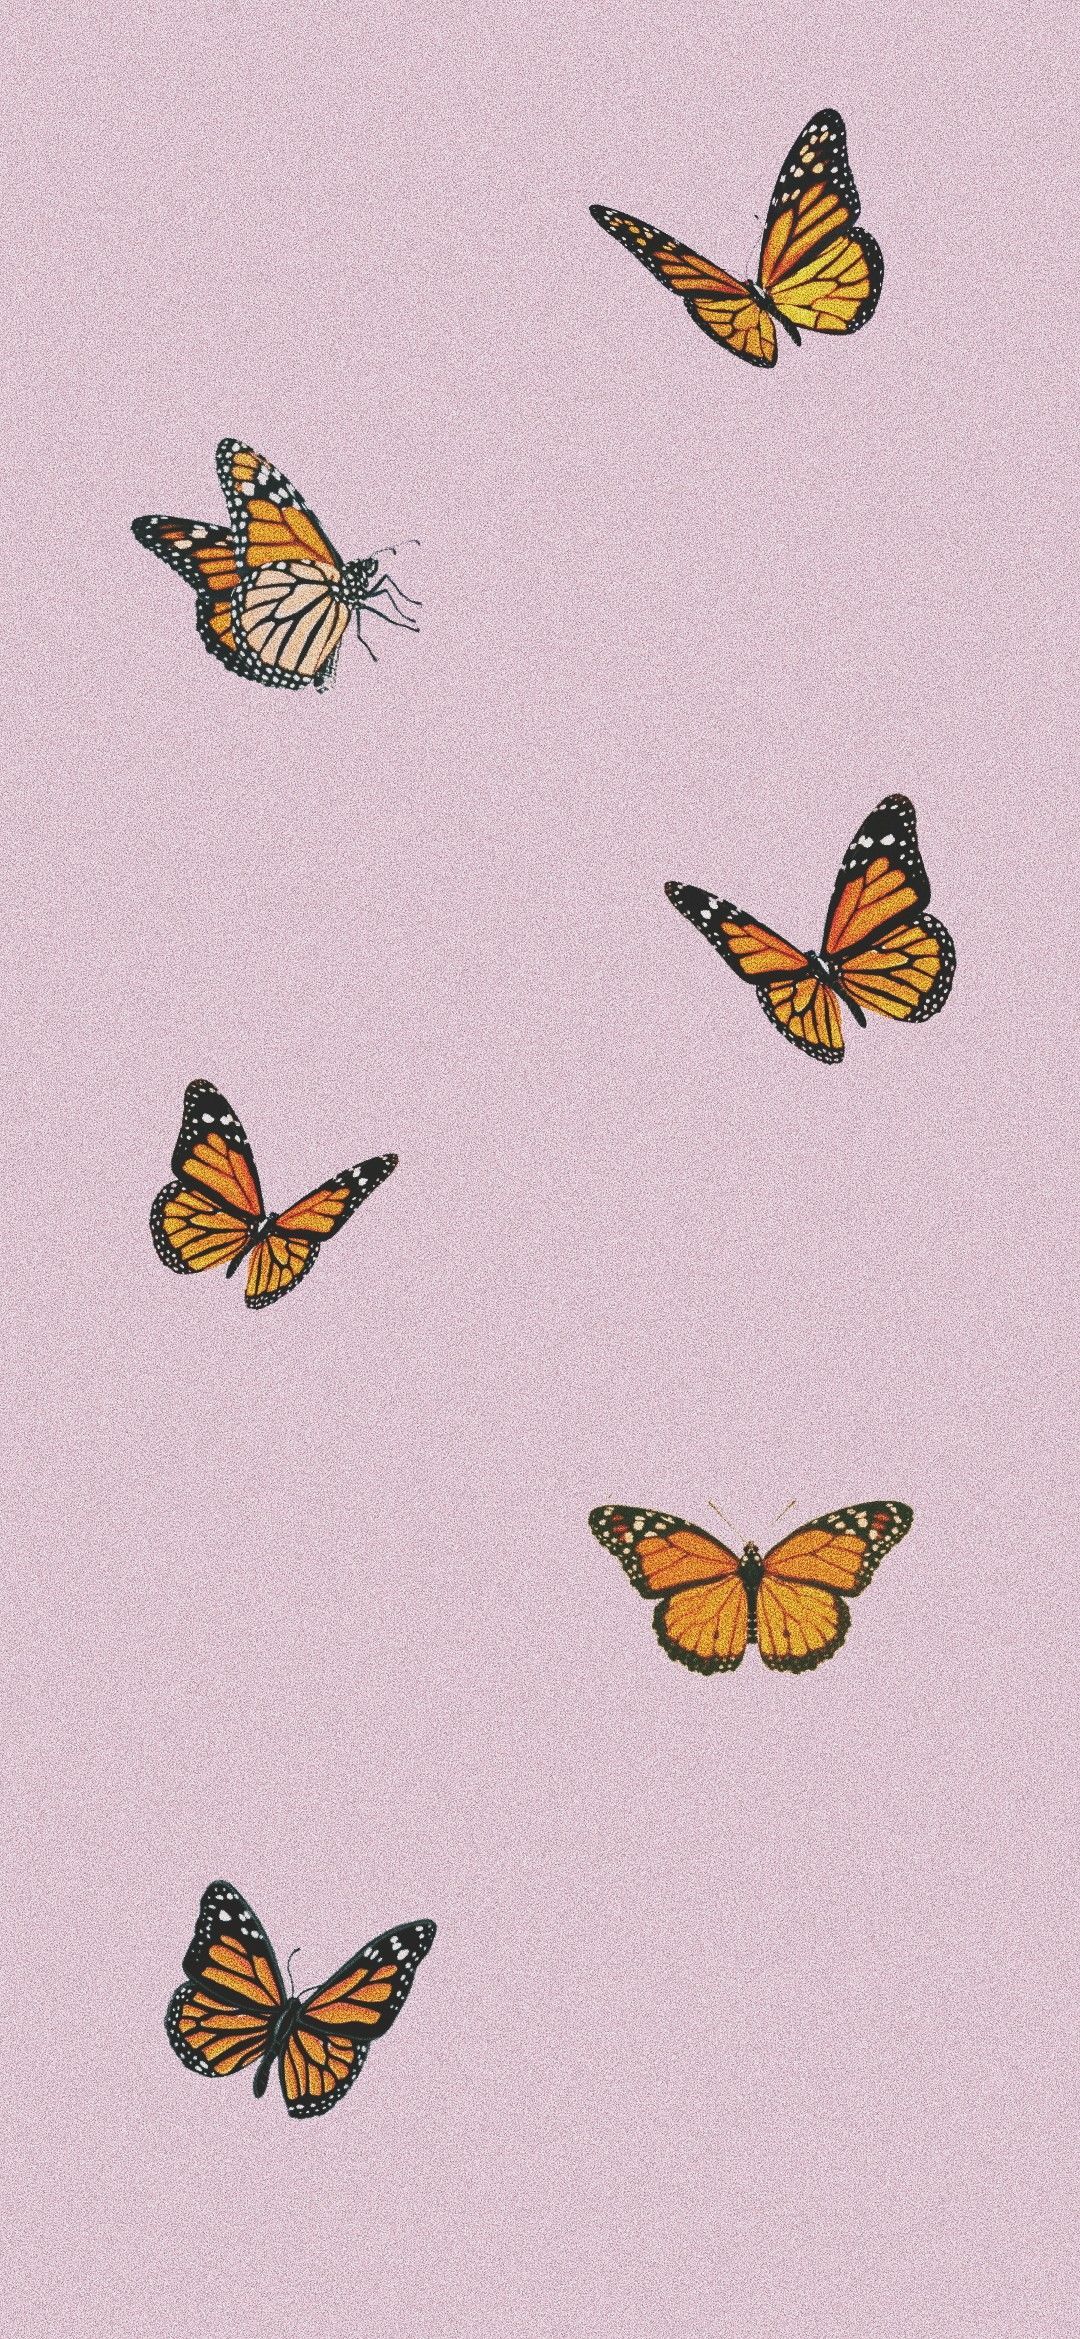 butterfly wallpaper iphone x big pink #iphonebackground in 2020